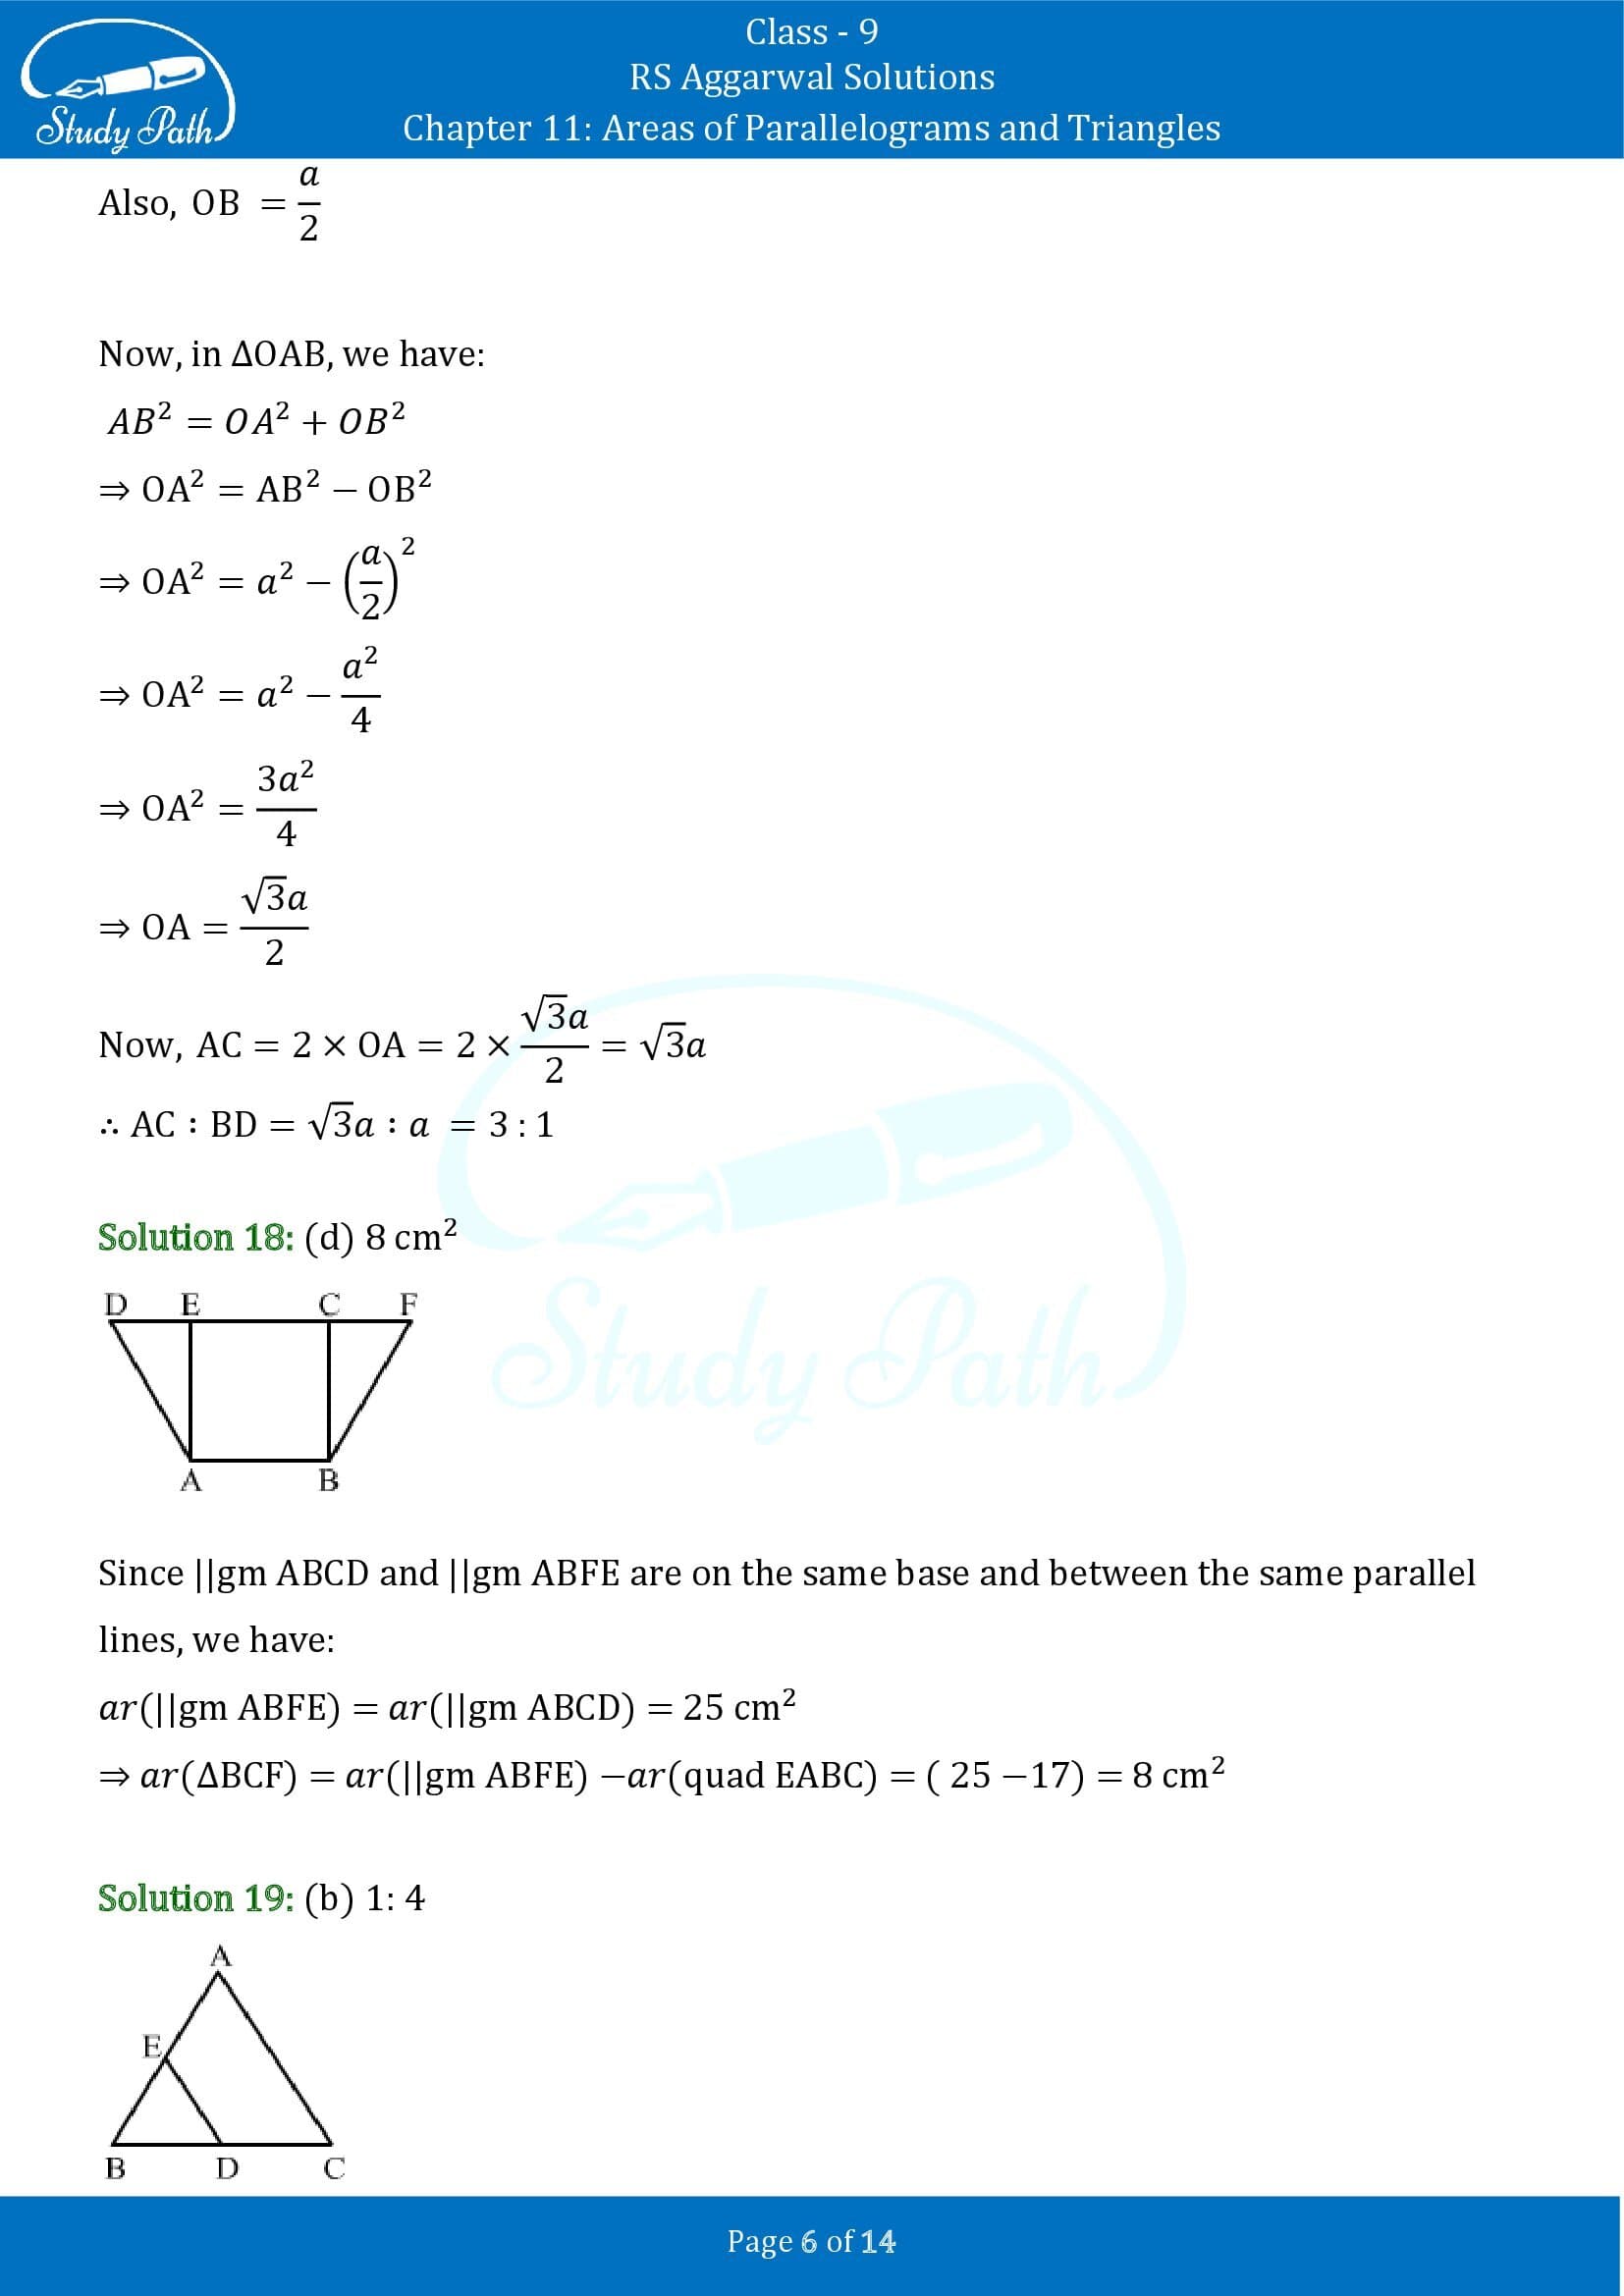 RS Aggarwal Solutions Class 9 Chapter 11 Areas of Parallelograms and Triangles Multiple Choice Questions MCQs 00006